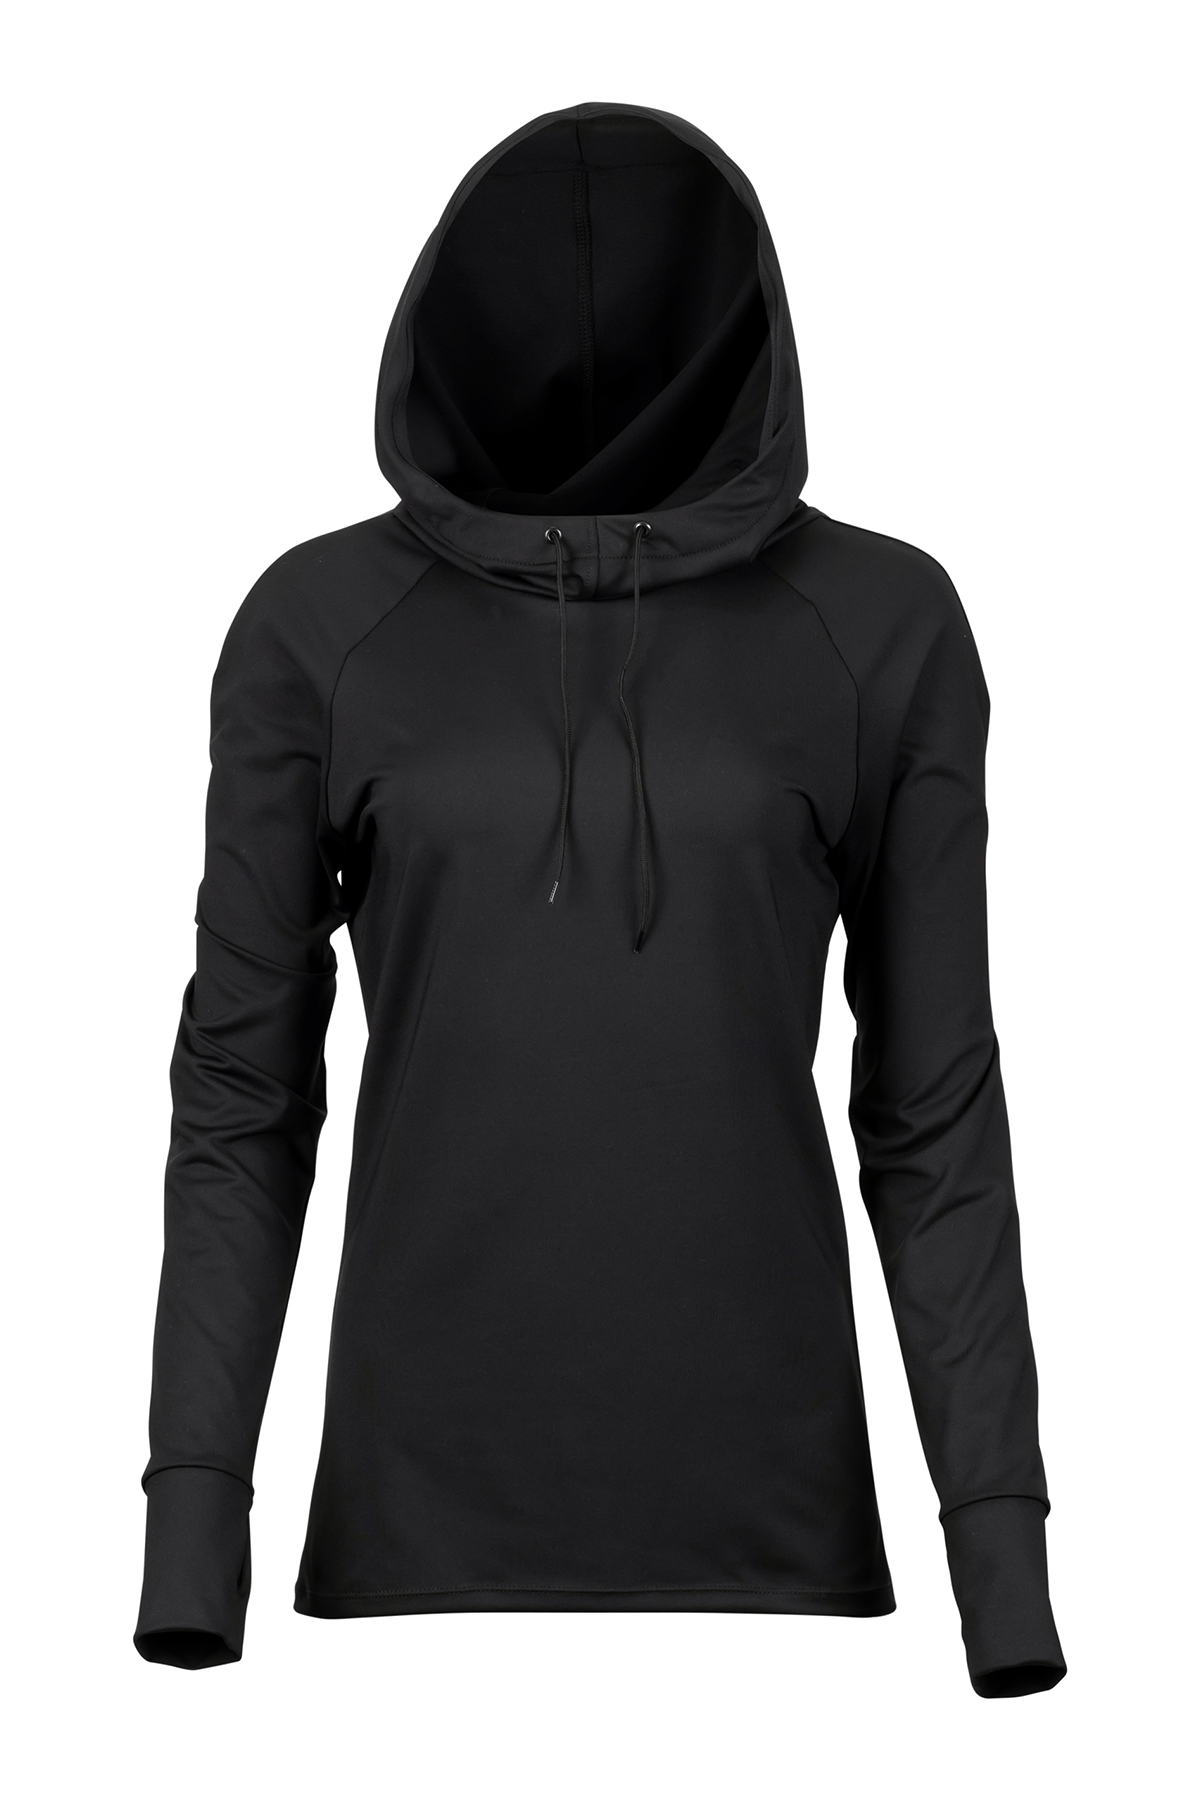 Women's 215 Hooded Compression Top Black / X-Small